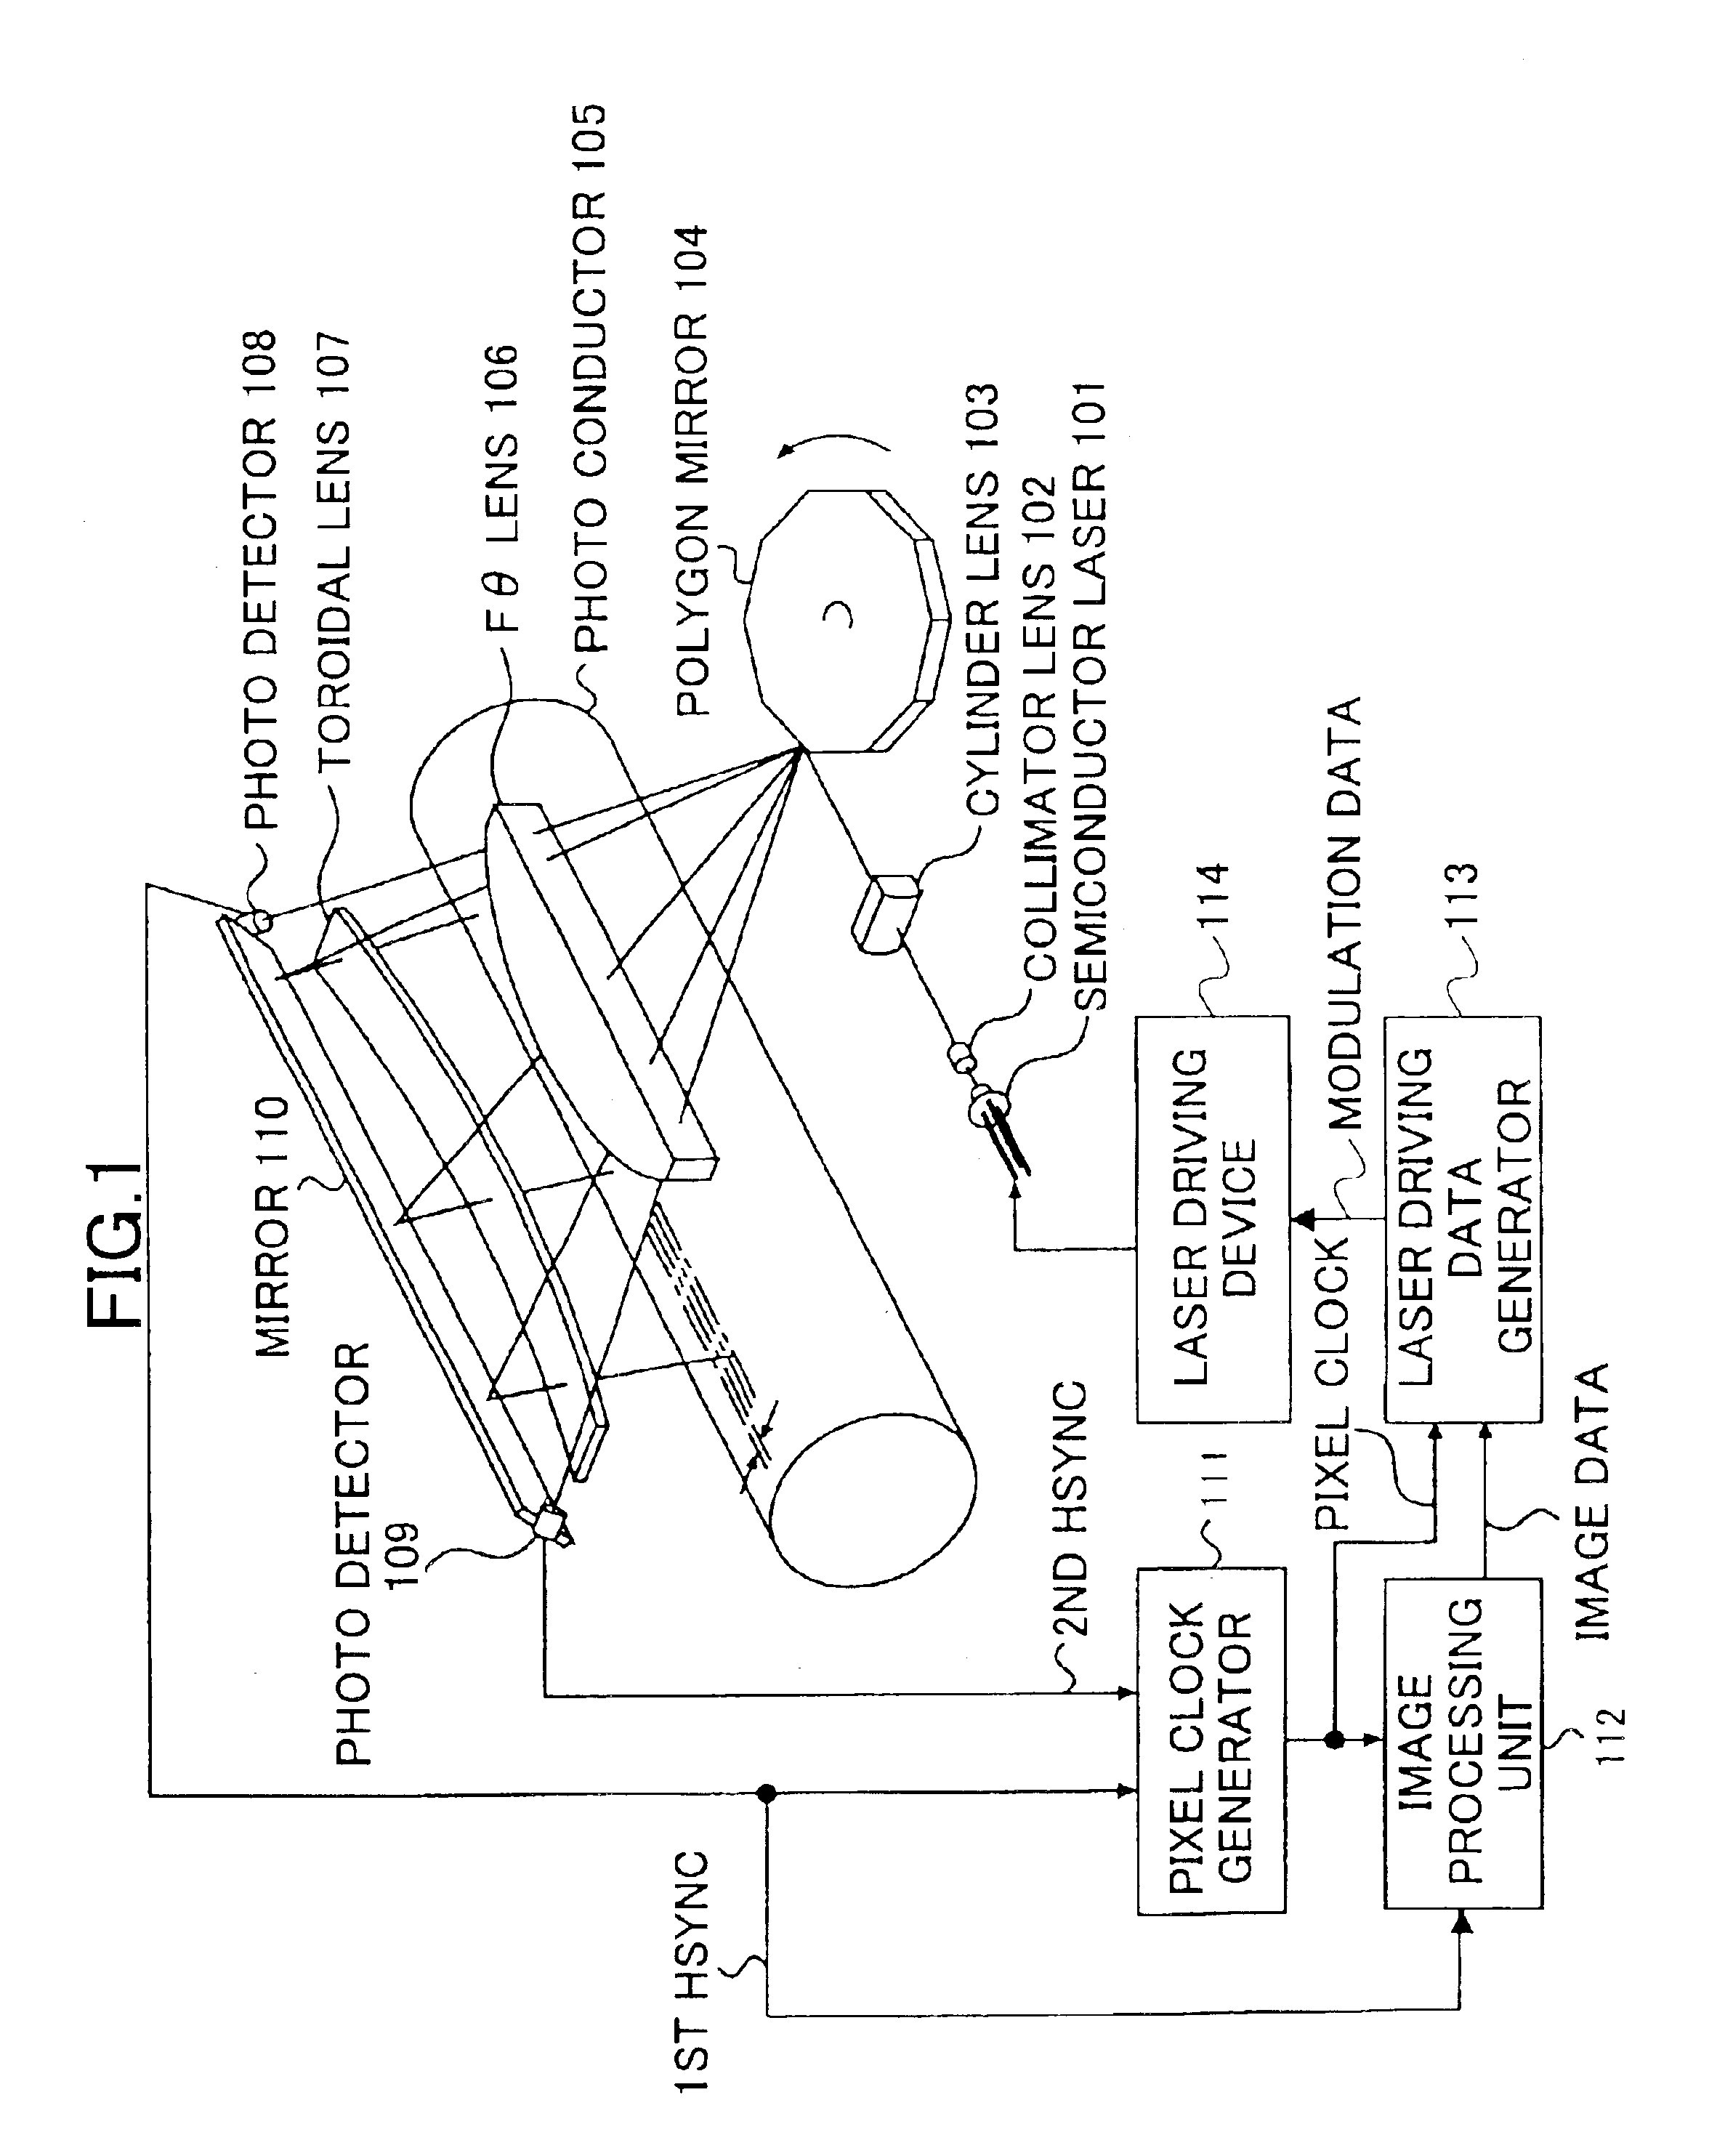 Pixel clock generating device, laser scanning device, and image forming device